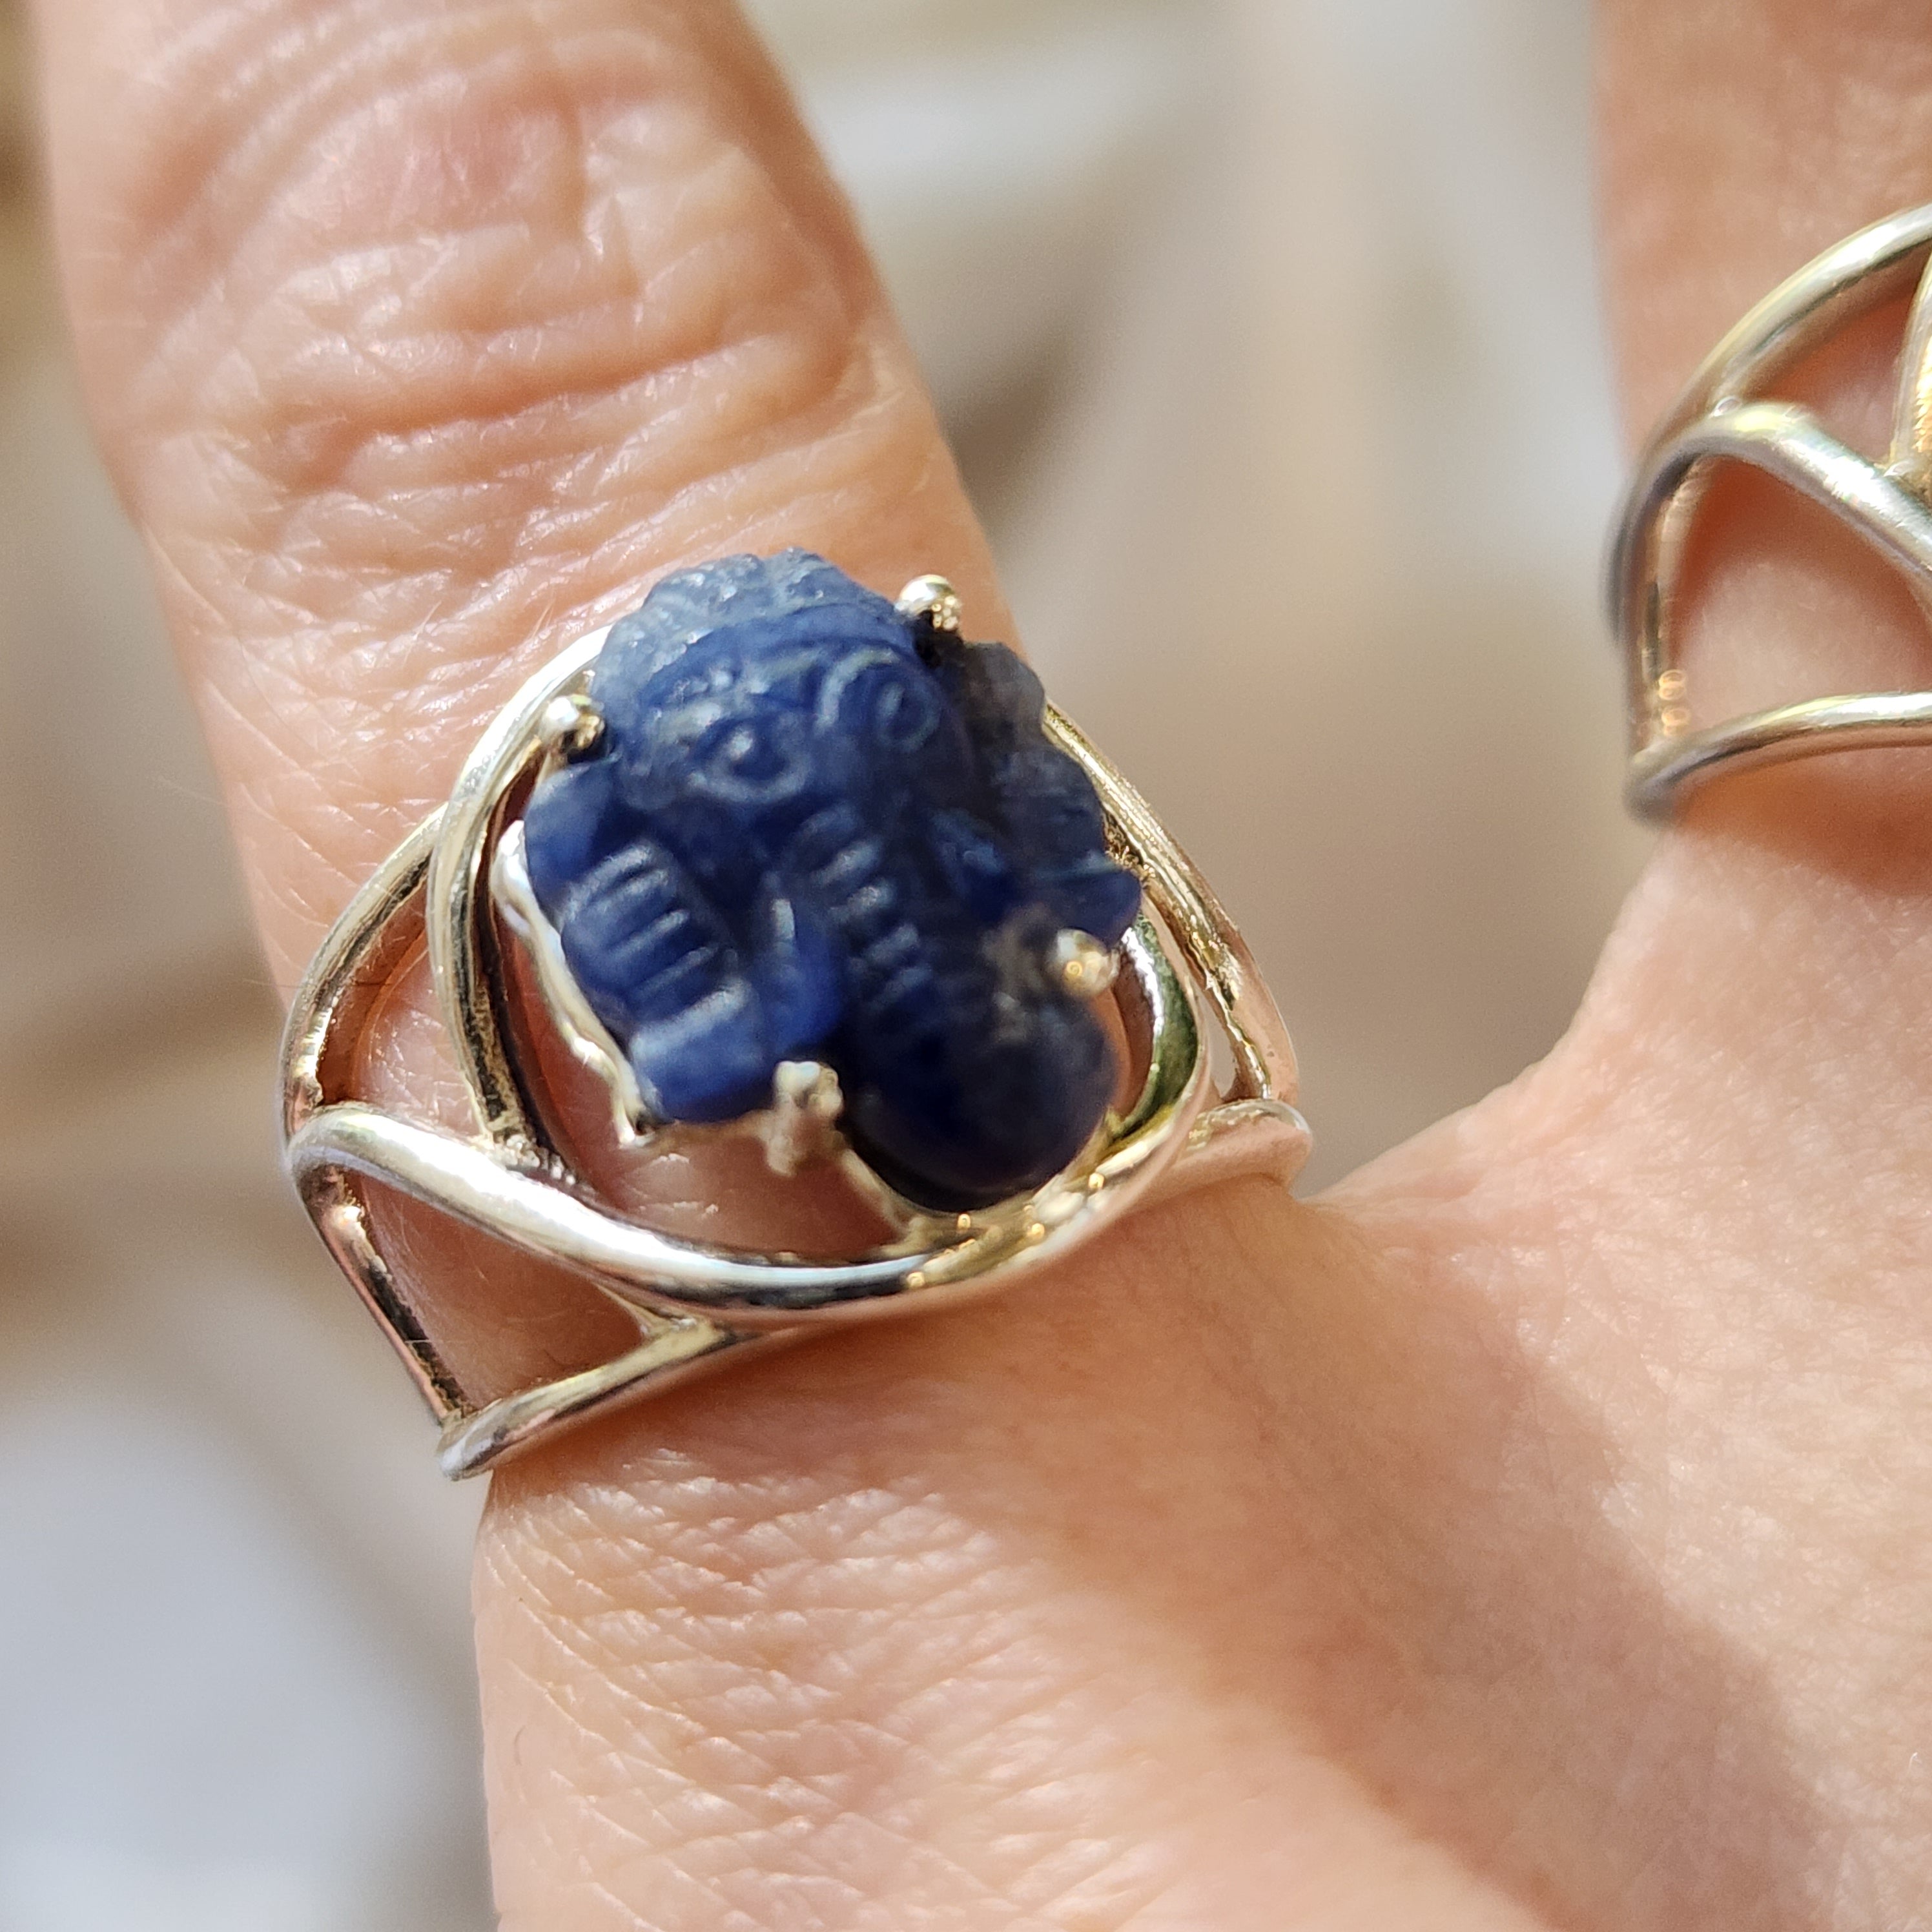 Blue Sapphire Ganesha Finger Cuff Adjustable Ring .925 Sterling Silver for Insight, Wisdom & Clearing Blockages